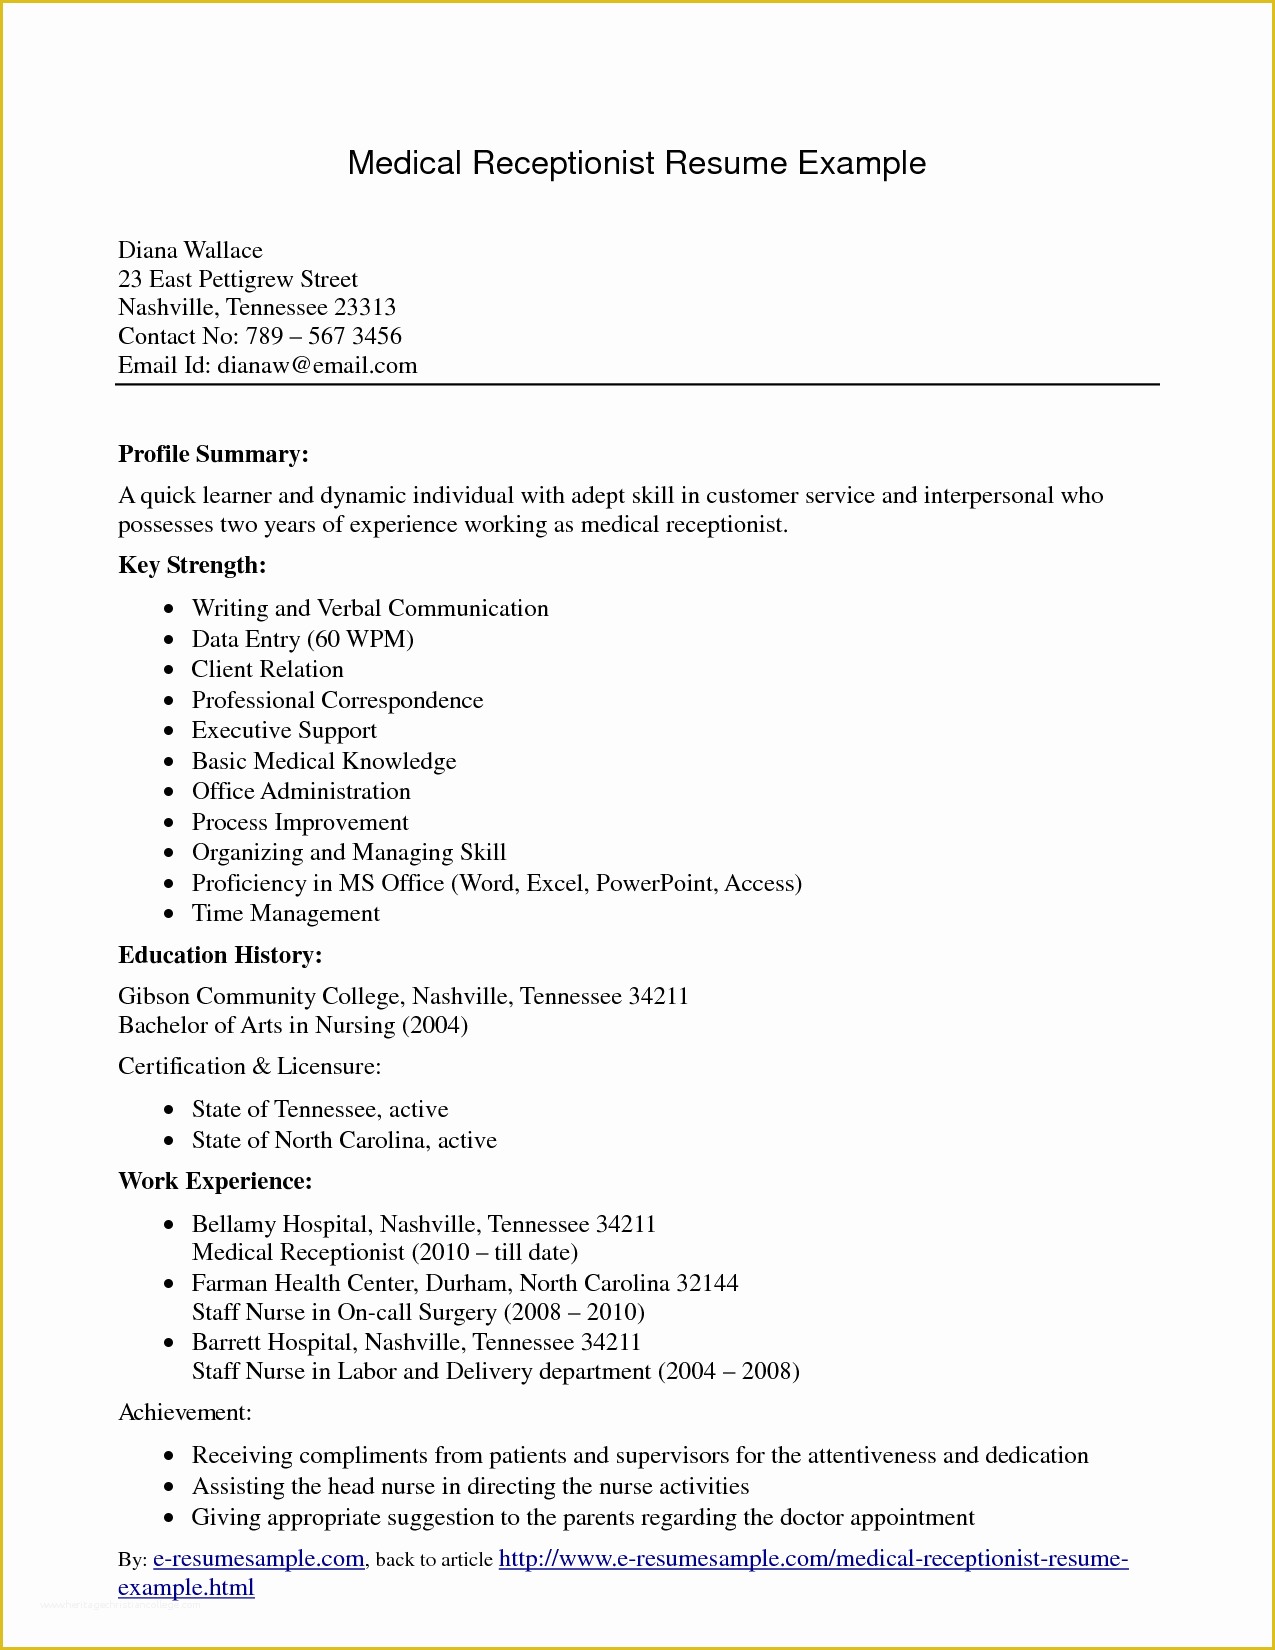 Medical Resume Template Free Of Free Medical Receptionist Resume